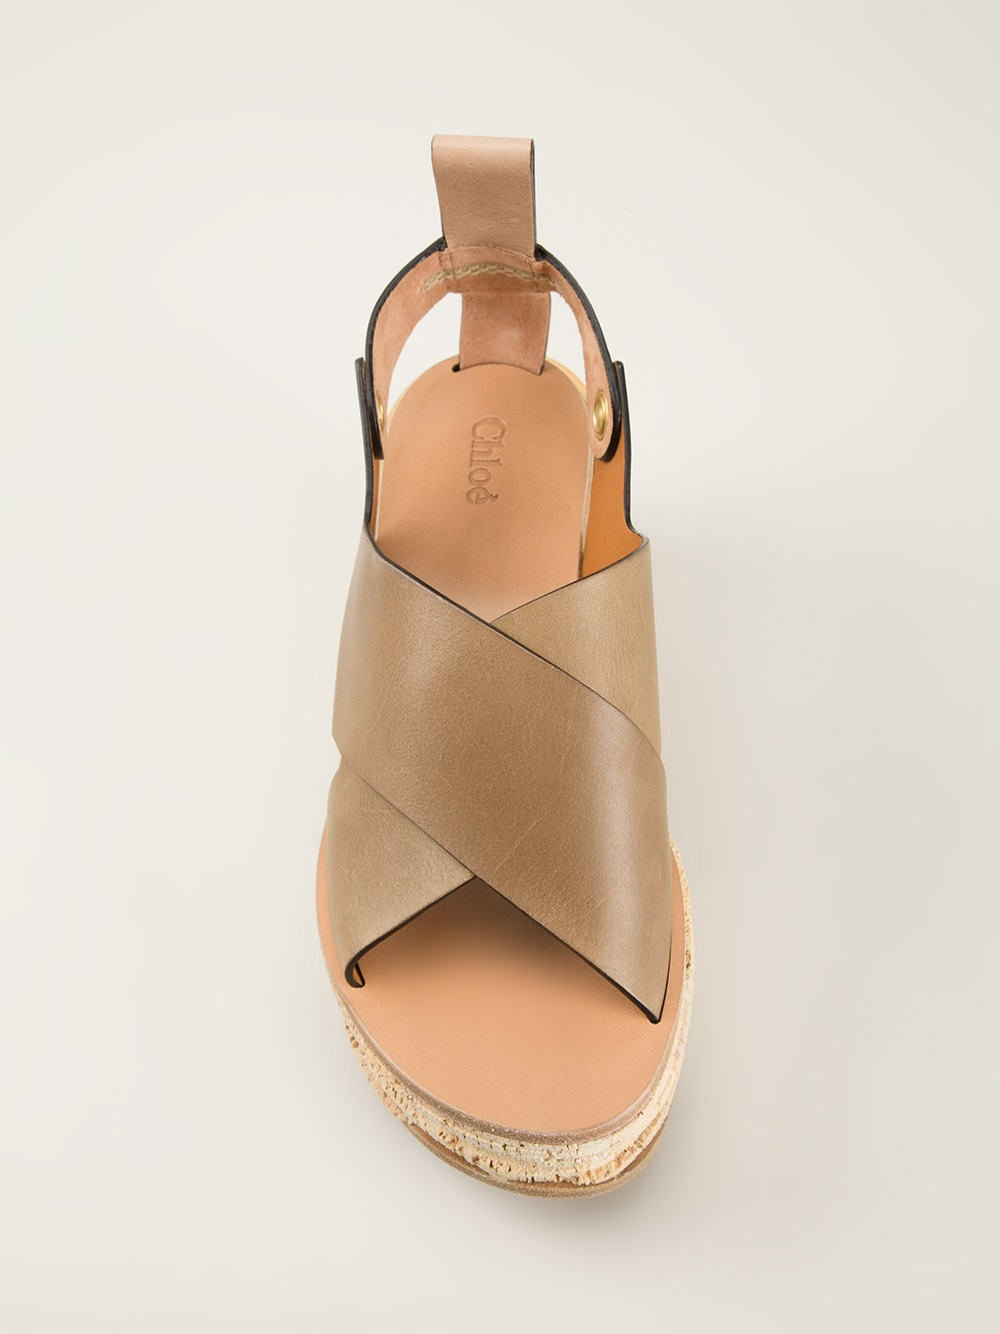 Chloé Camille Wedge Sandal in Brown - Lyst